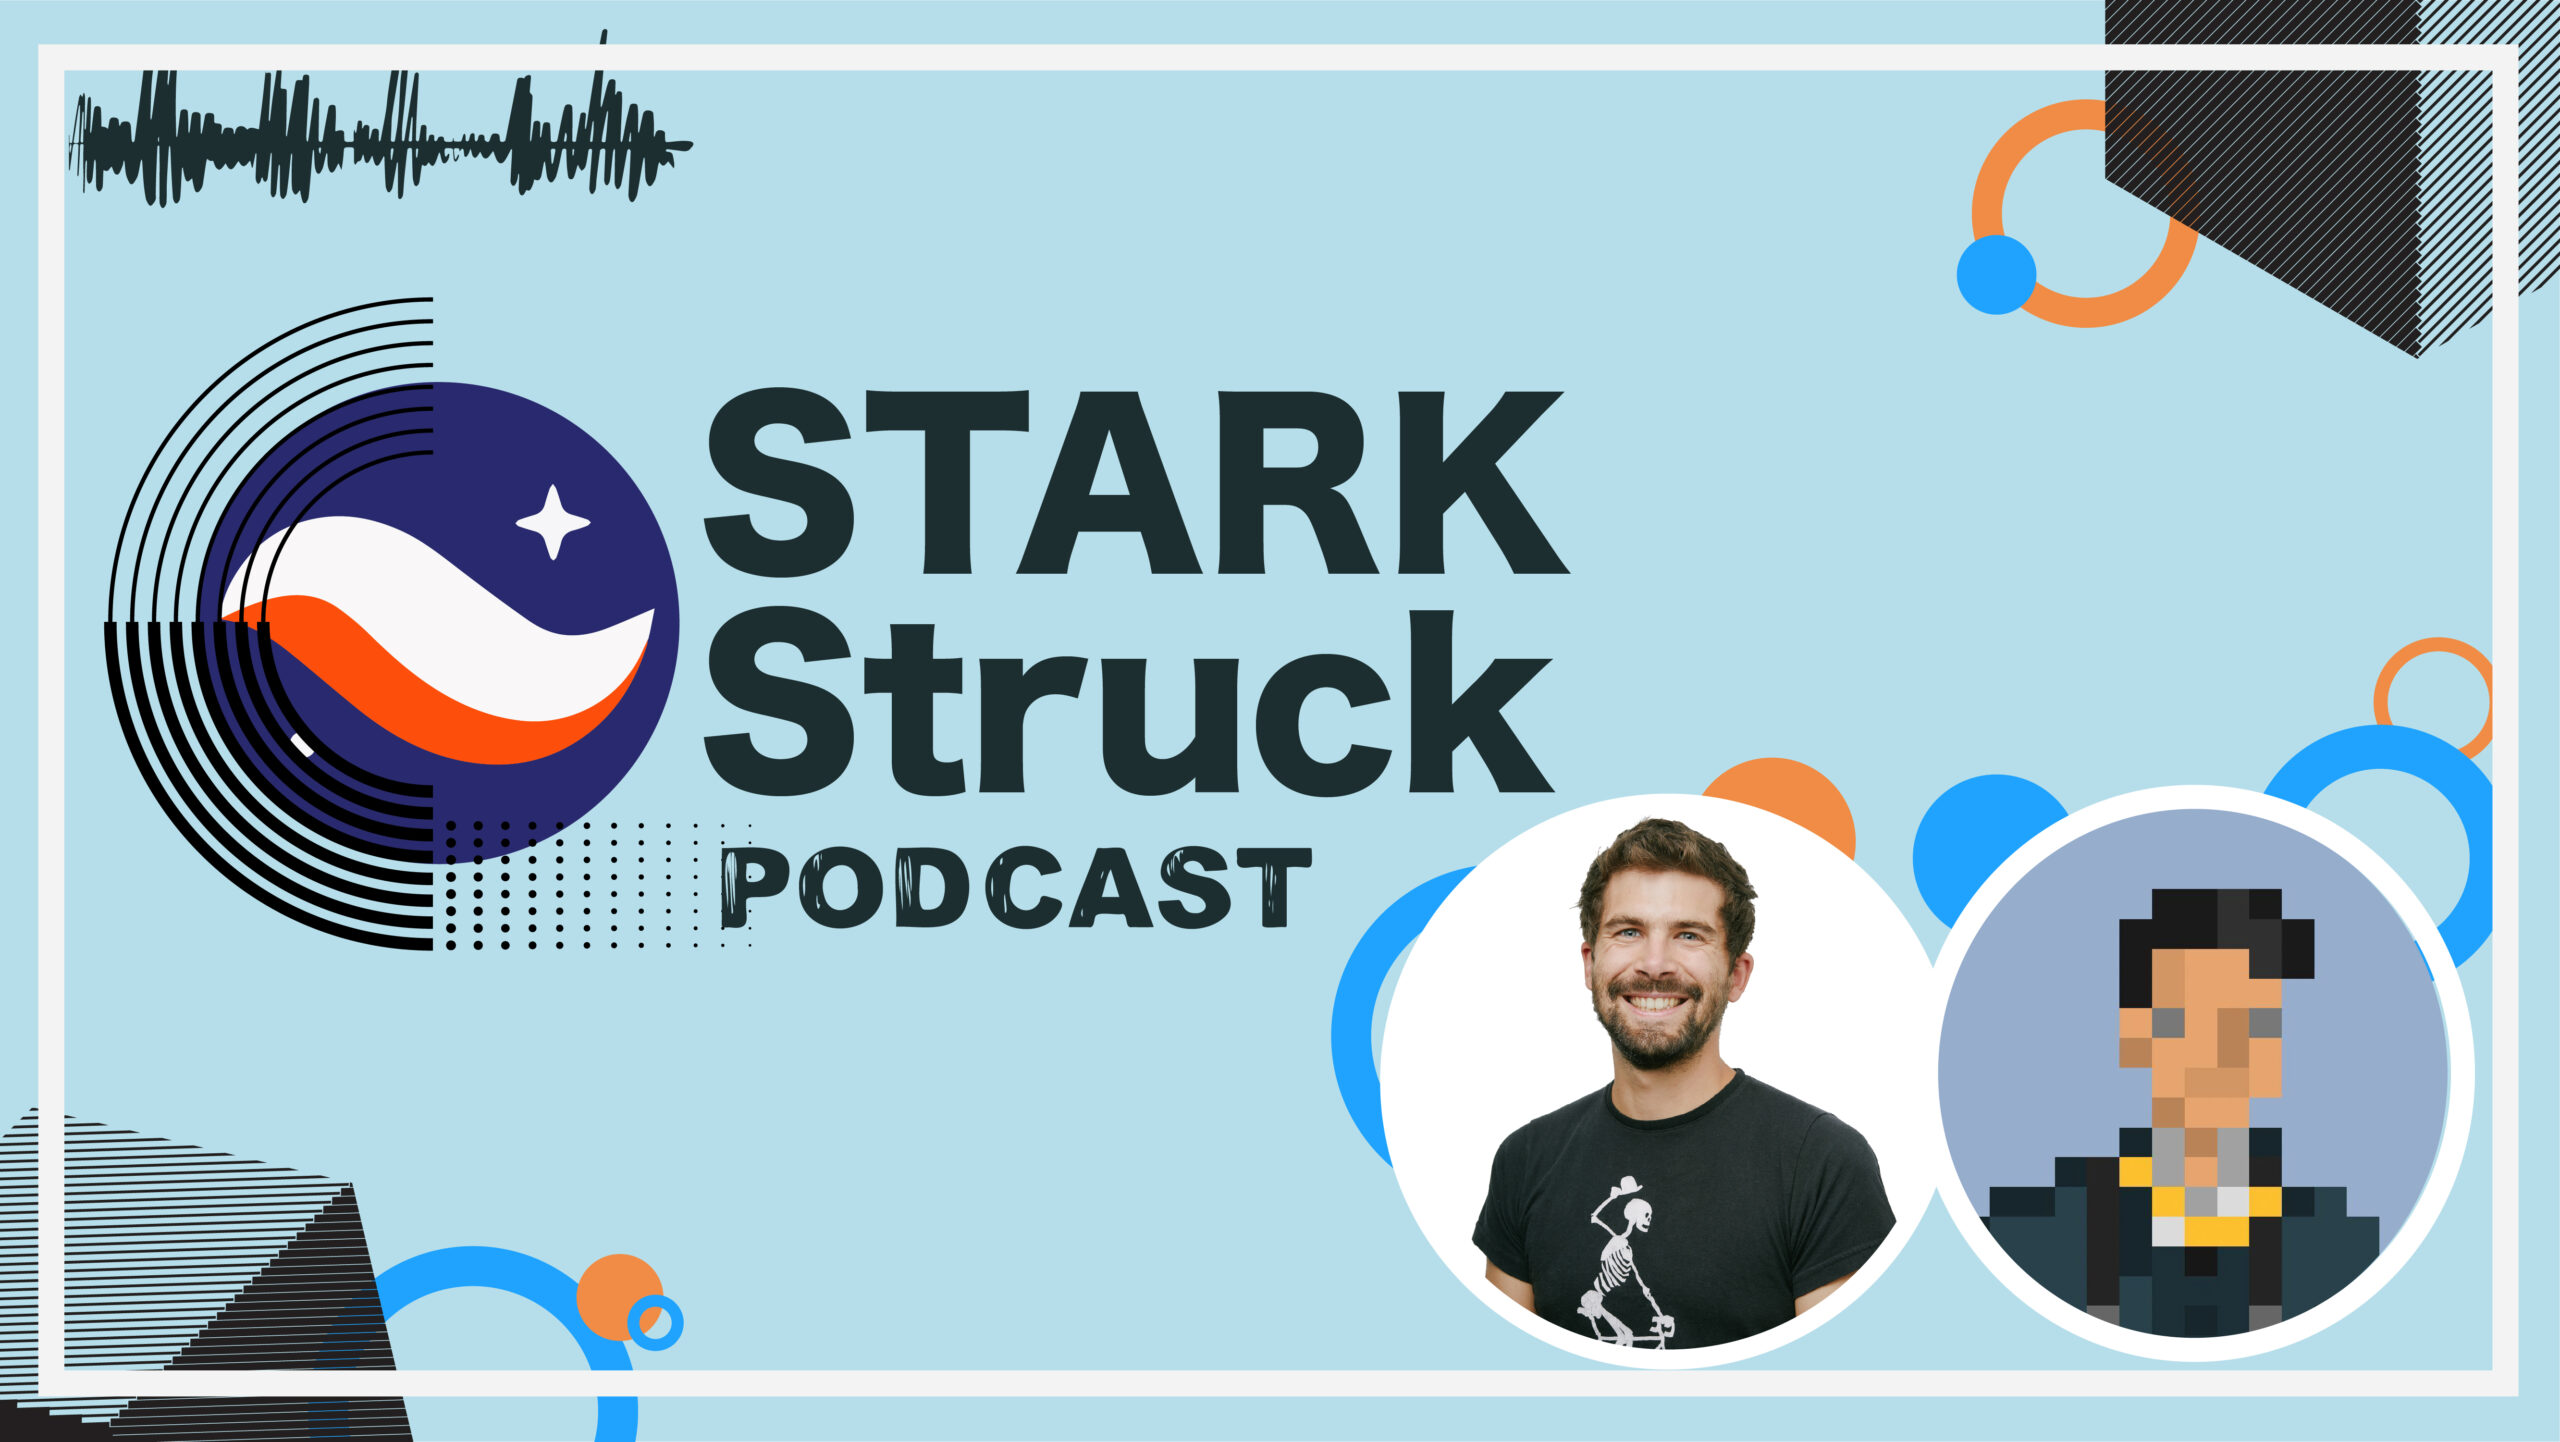 STARK Struck Podcast | Episode 10 | Henri Lieutaud with Tarrence from Cartridge